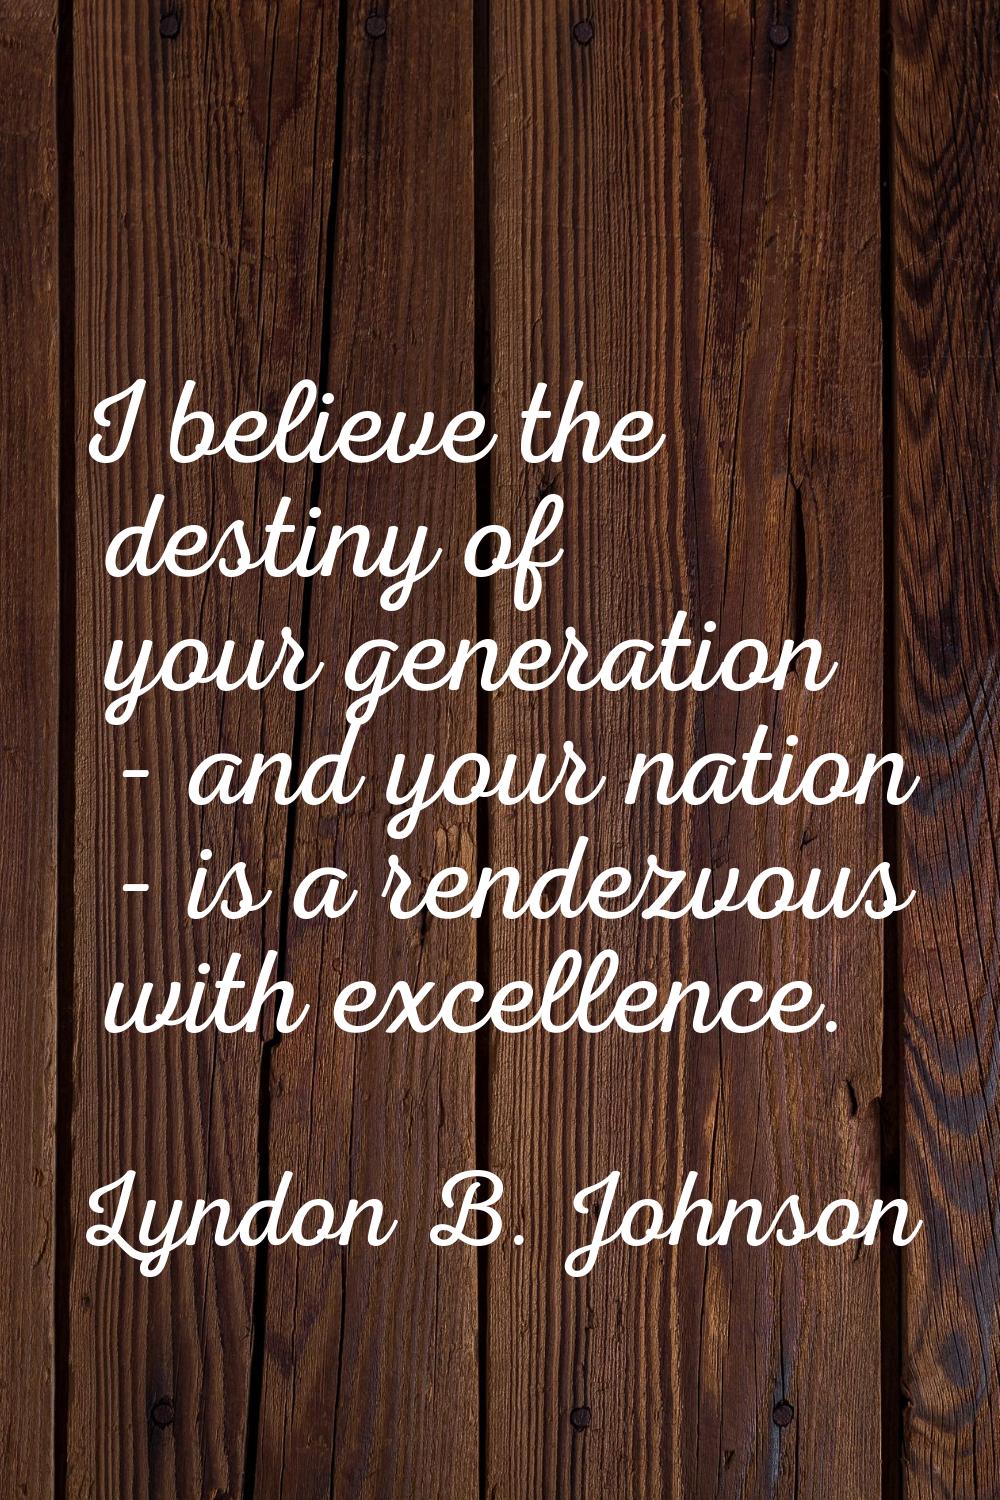 I believe the destiny of your generation - and your nation - is a rendezvous with excellence.